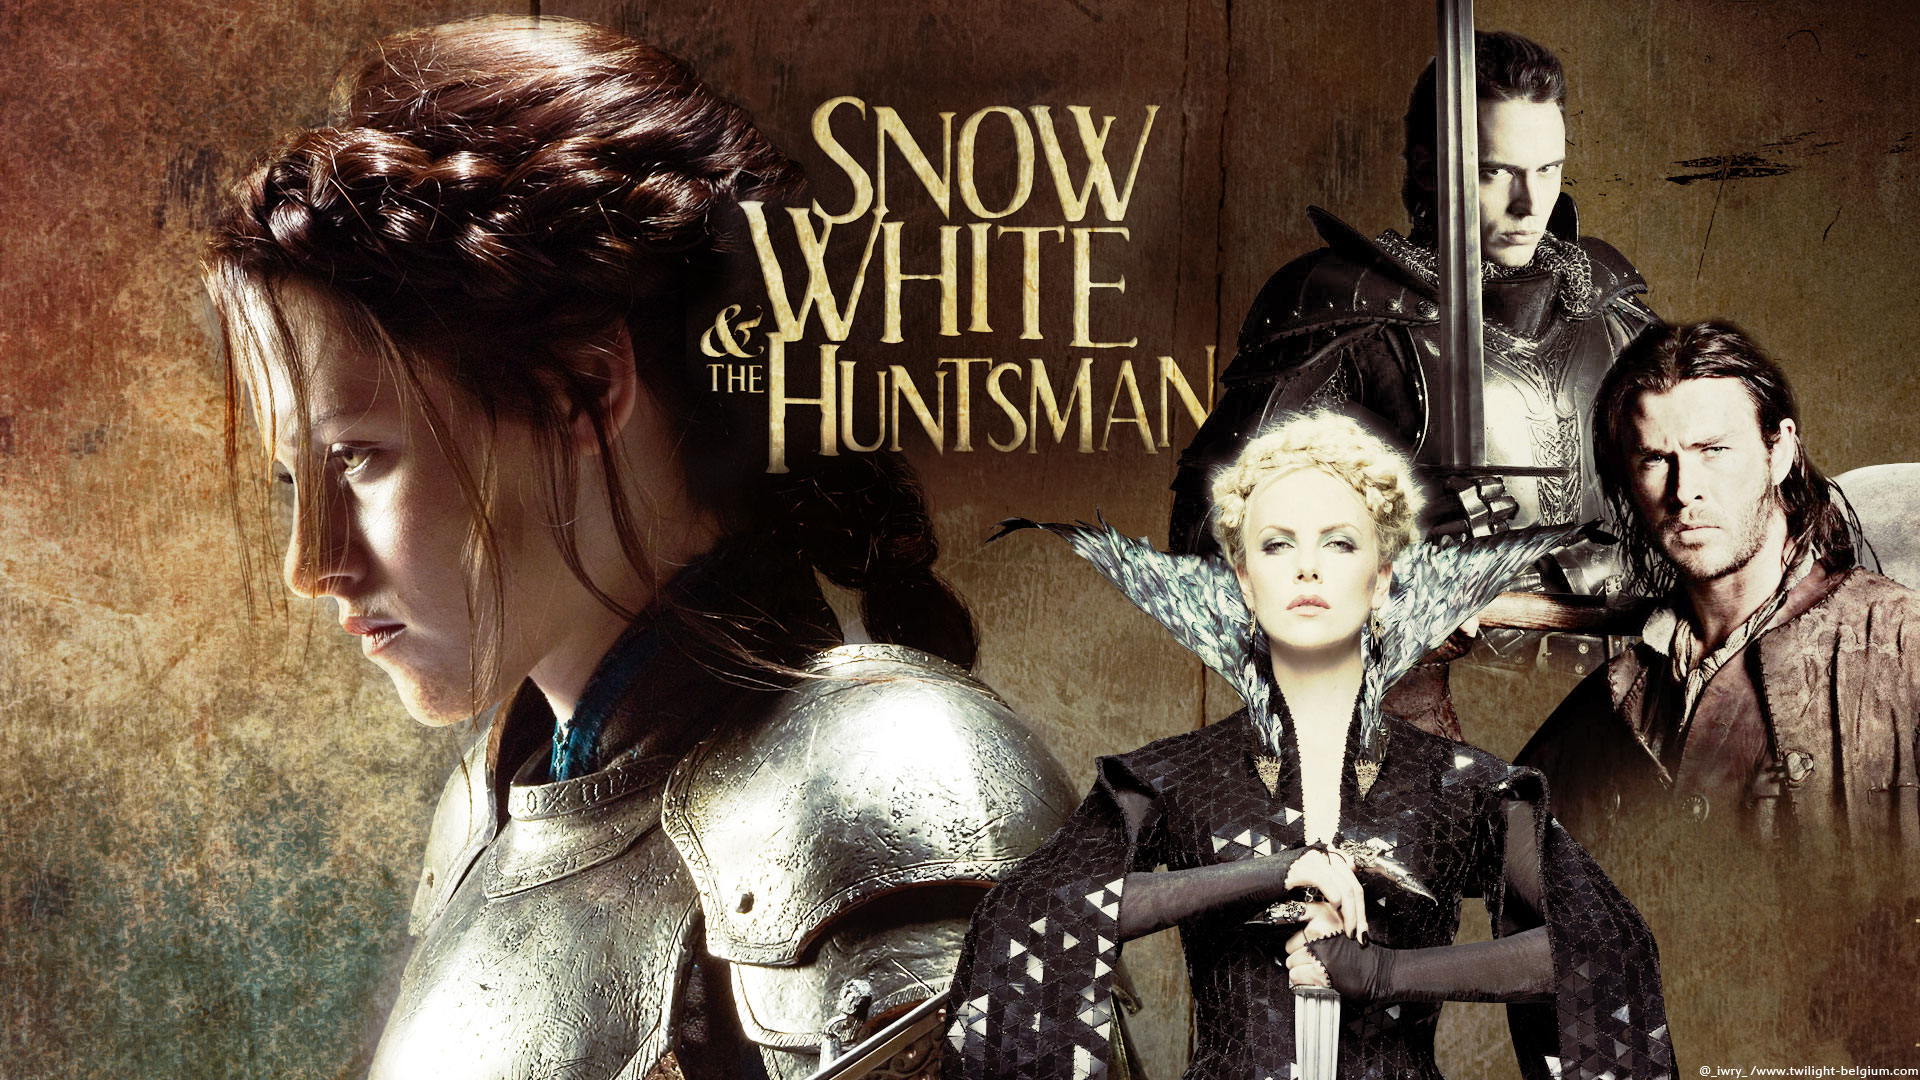 Snow White and the Huntsman (2012) Snow-white-and-the-huntsman-wallpaper-snow-white-and-the-huntsman-24036127-1920-10801